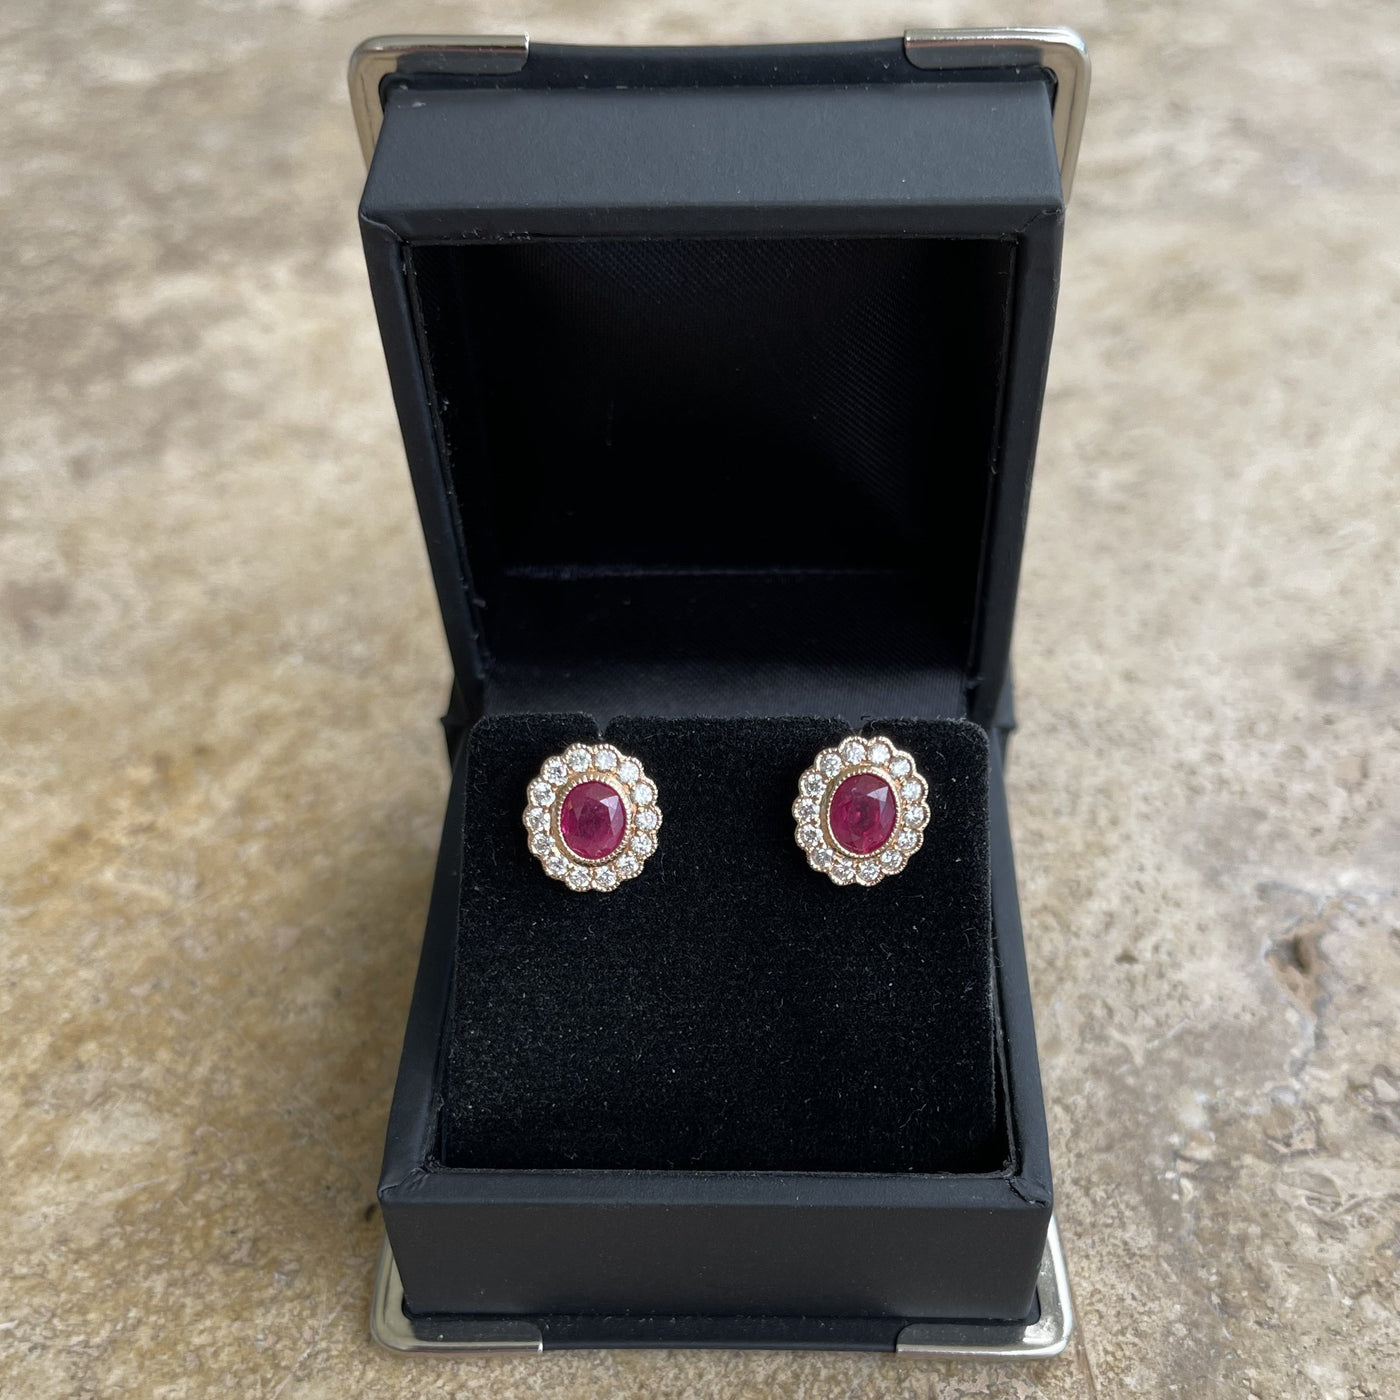 18CT Rose Gold Ruby and Diamond Stud Earrings